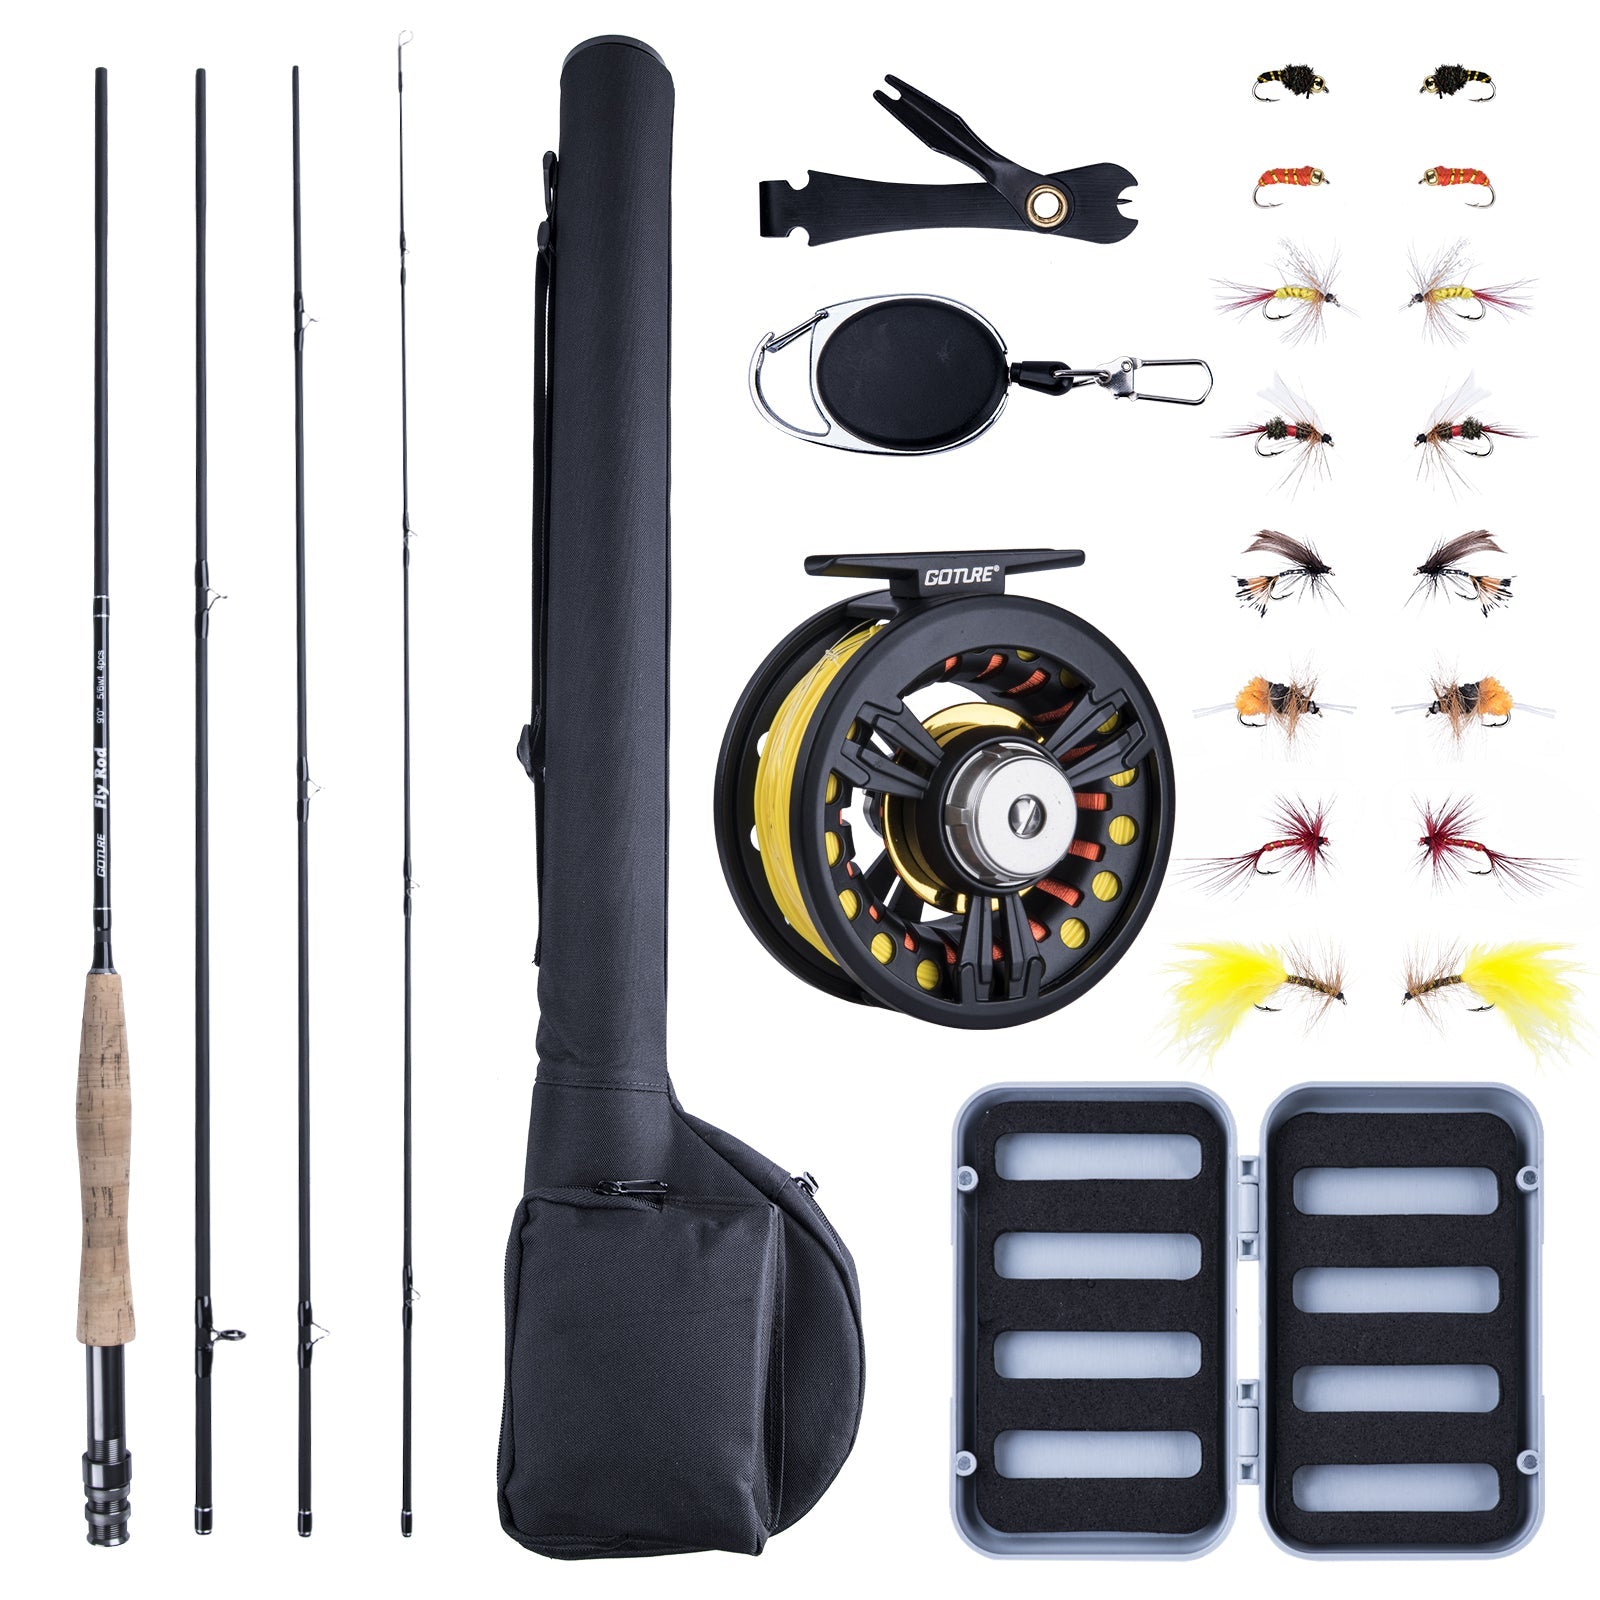 MASTER LOGIC Fly Fishing Rod and Reel Combo Starter Kit with Lightweight  Fly Box Case & Fishing Flies and Die Cast Aluminum Reel - AliExpress